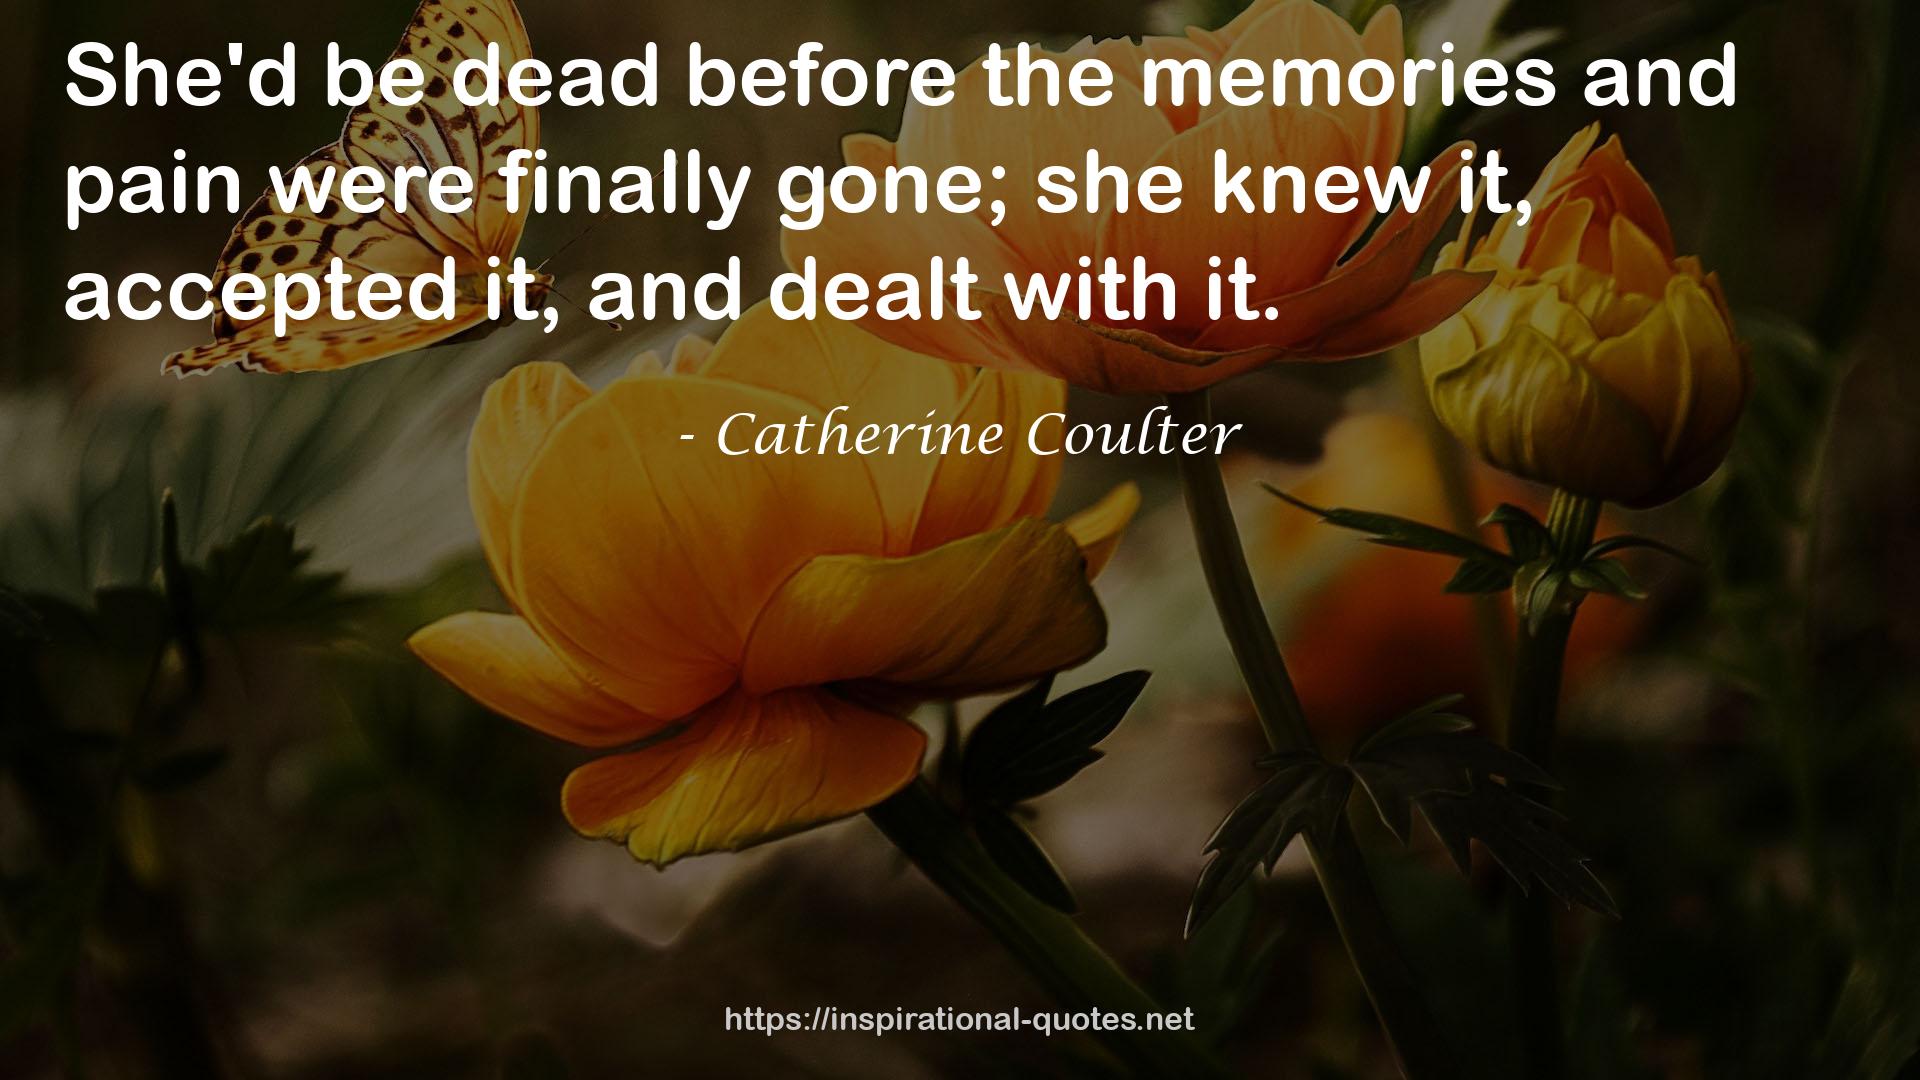 Catherine Coulter QUOTES